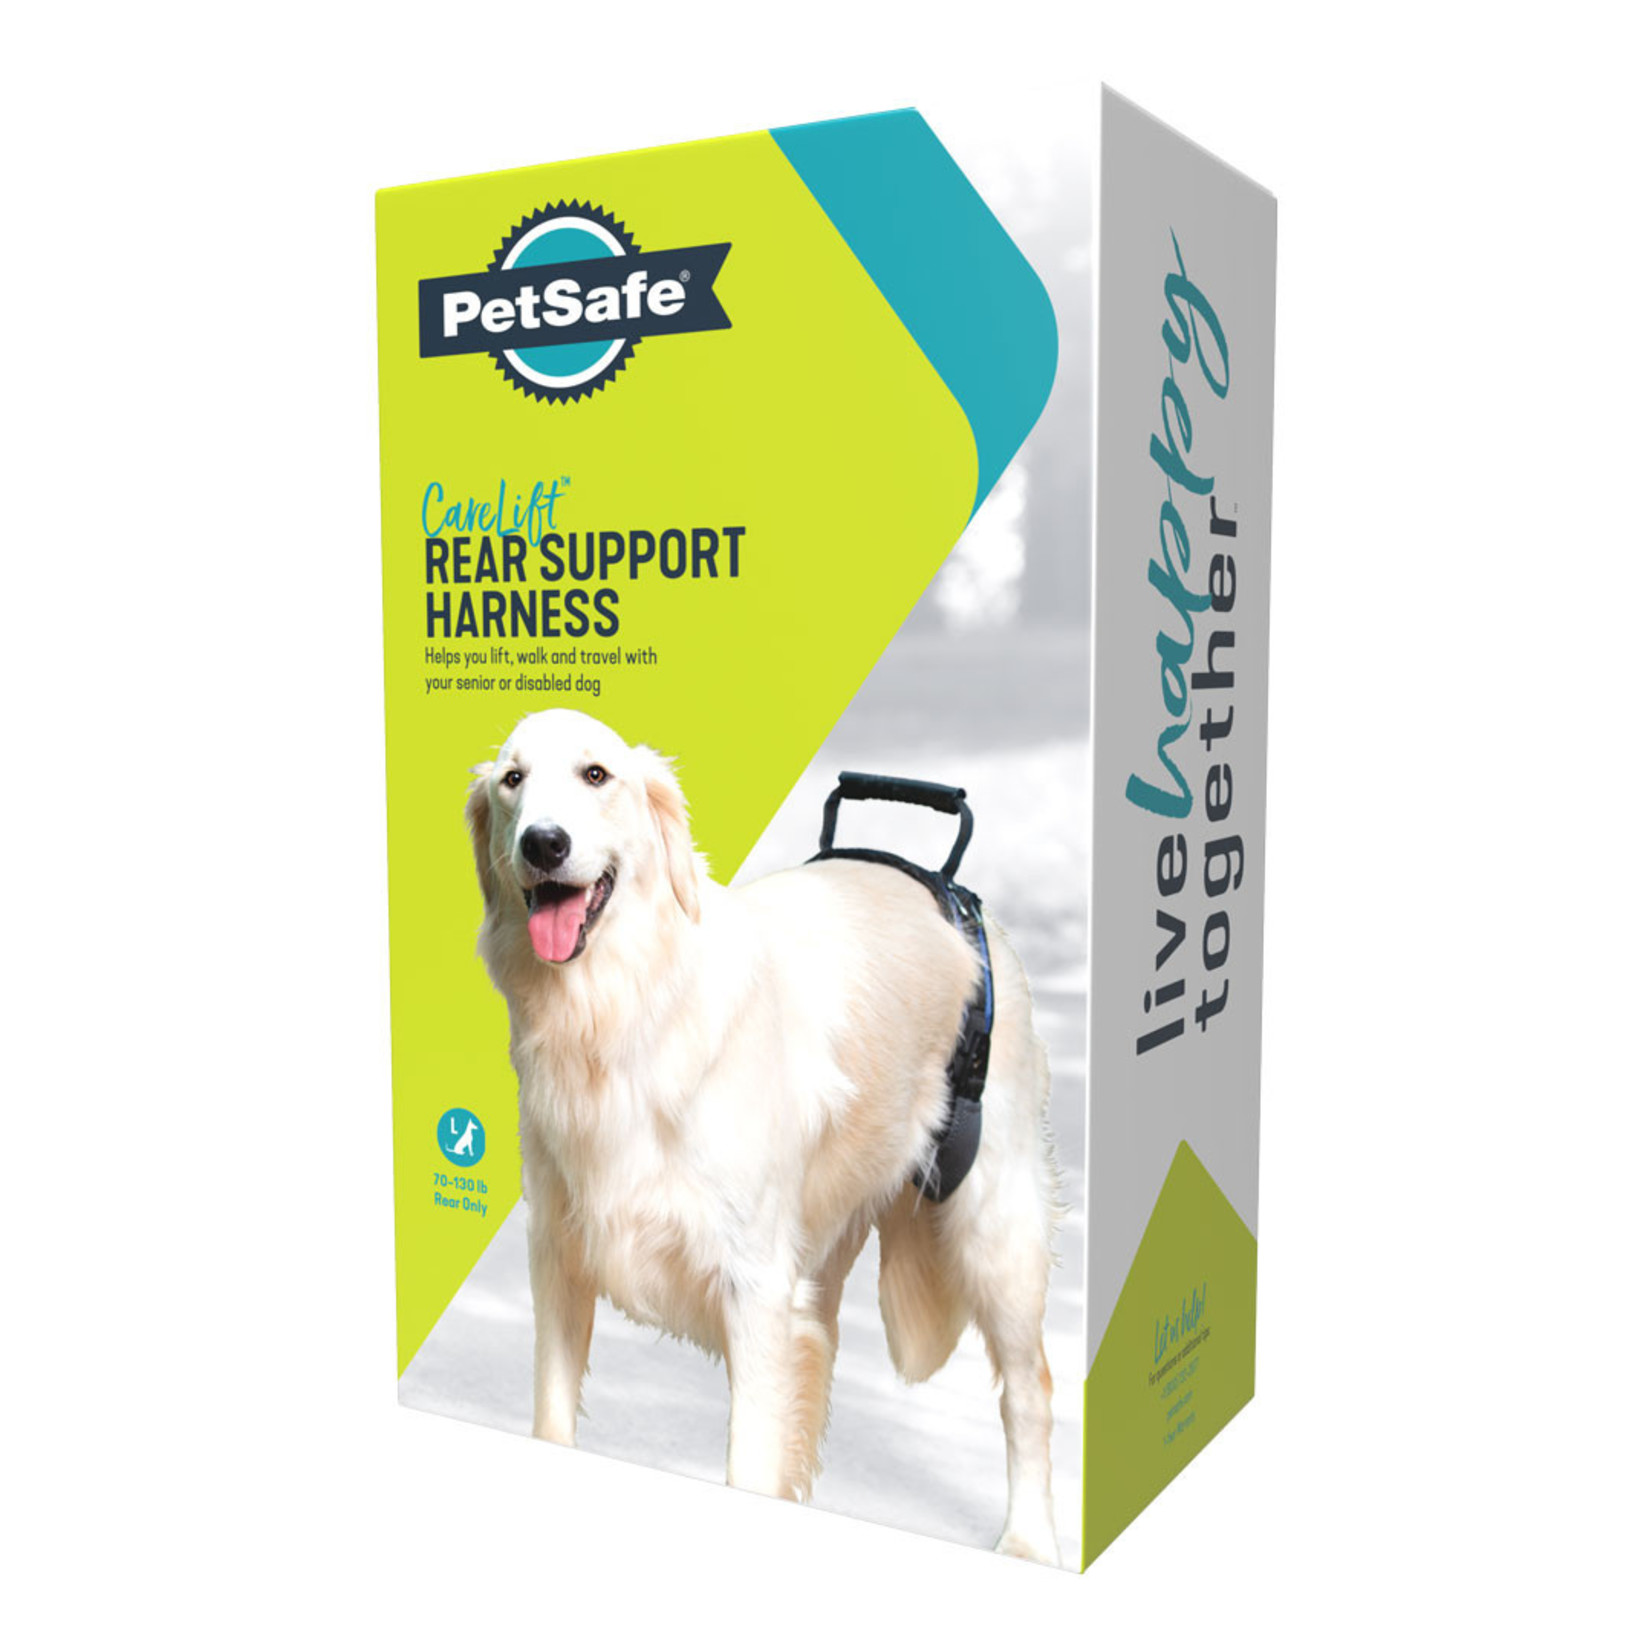 PetSafe CareLift Rear Support Harness for Disabled and Senior Dogs